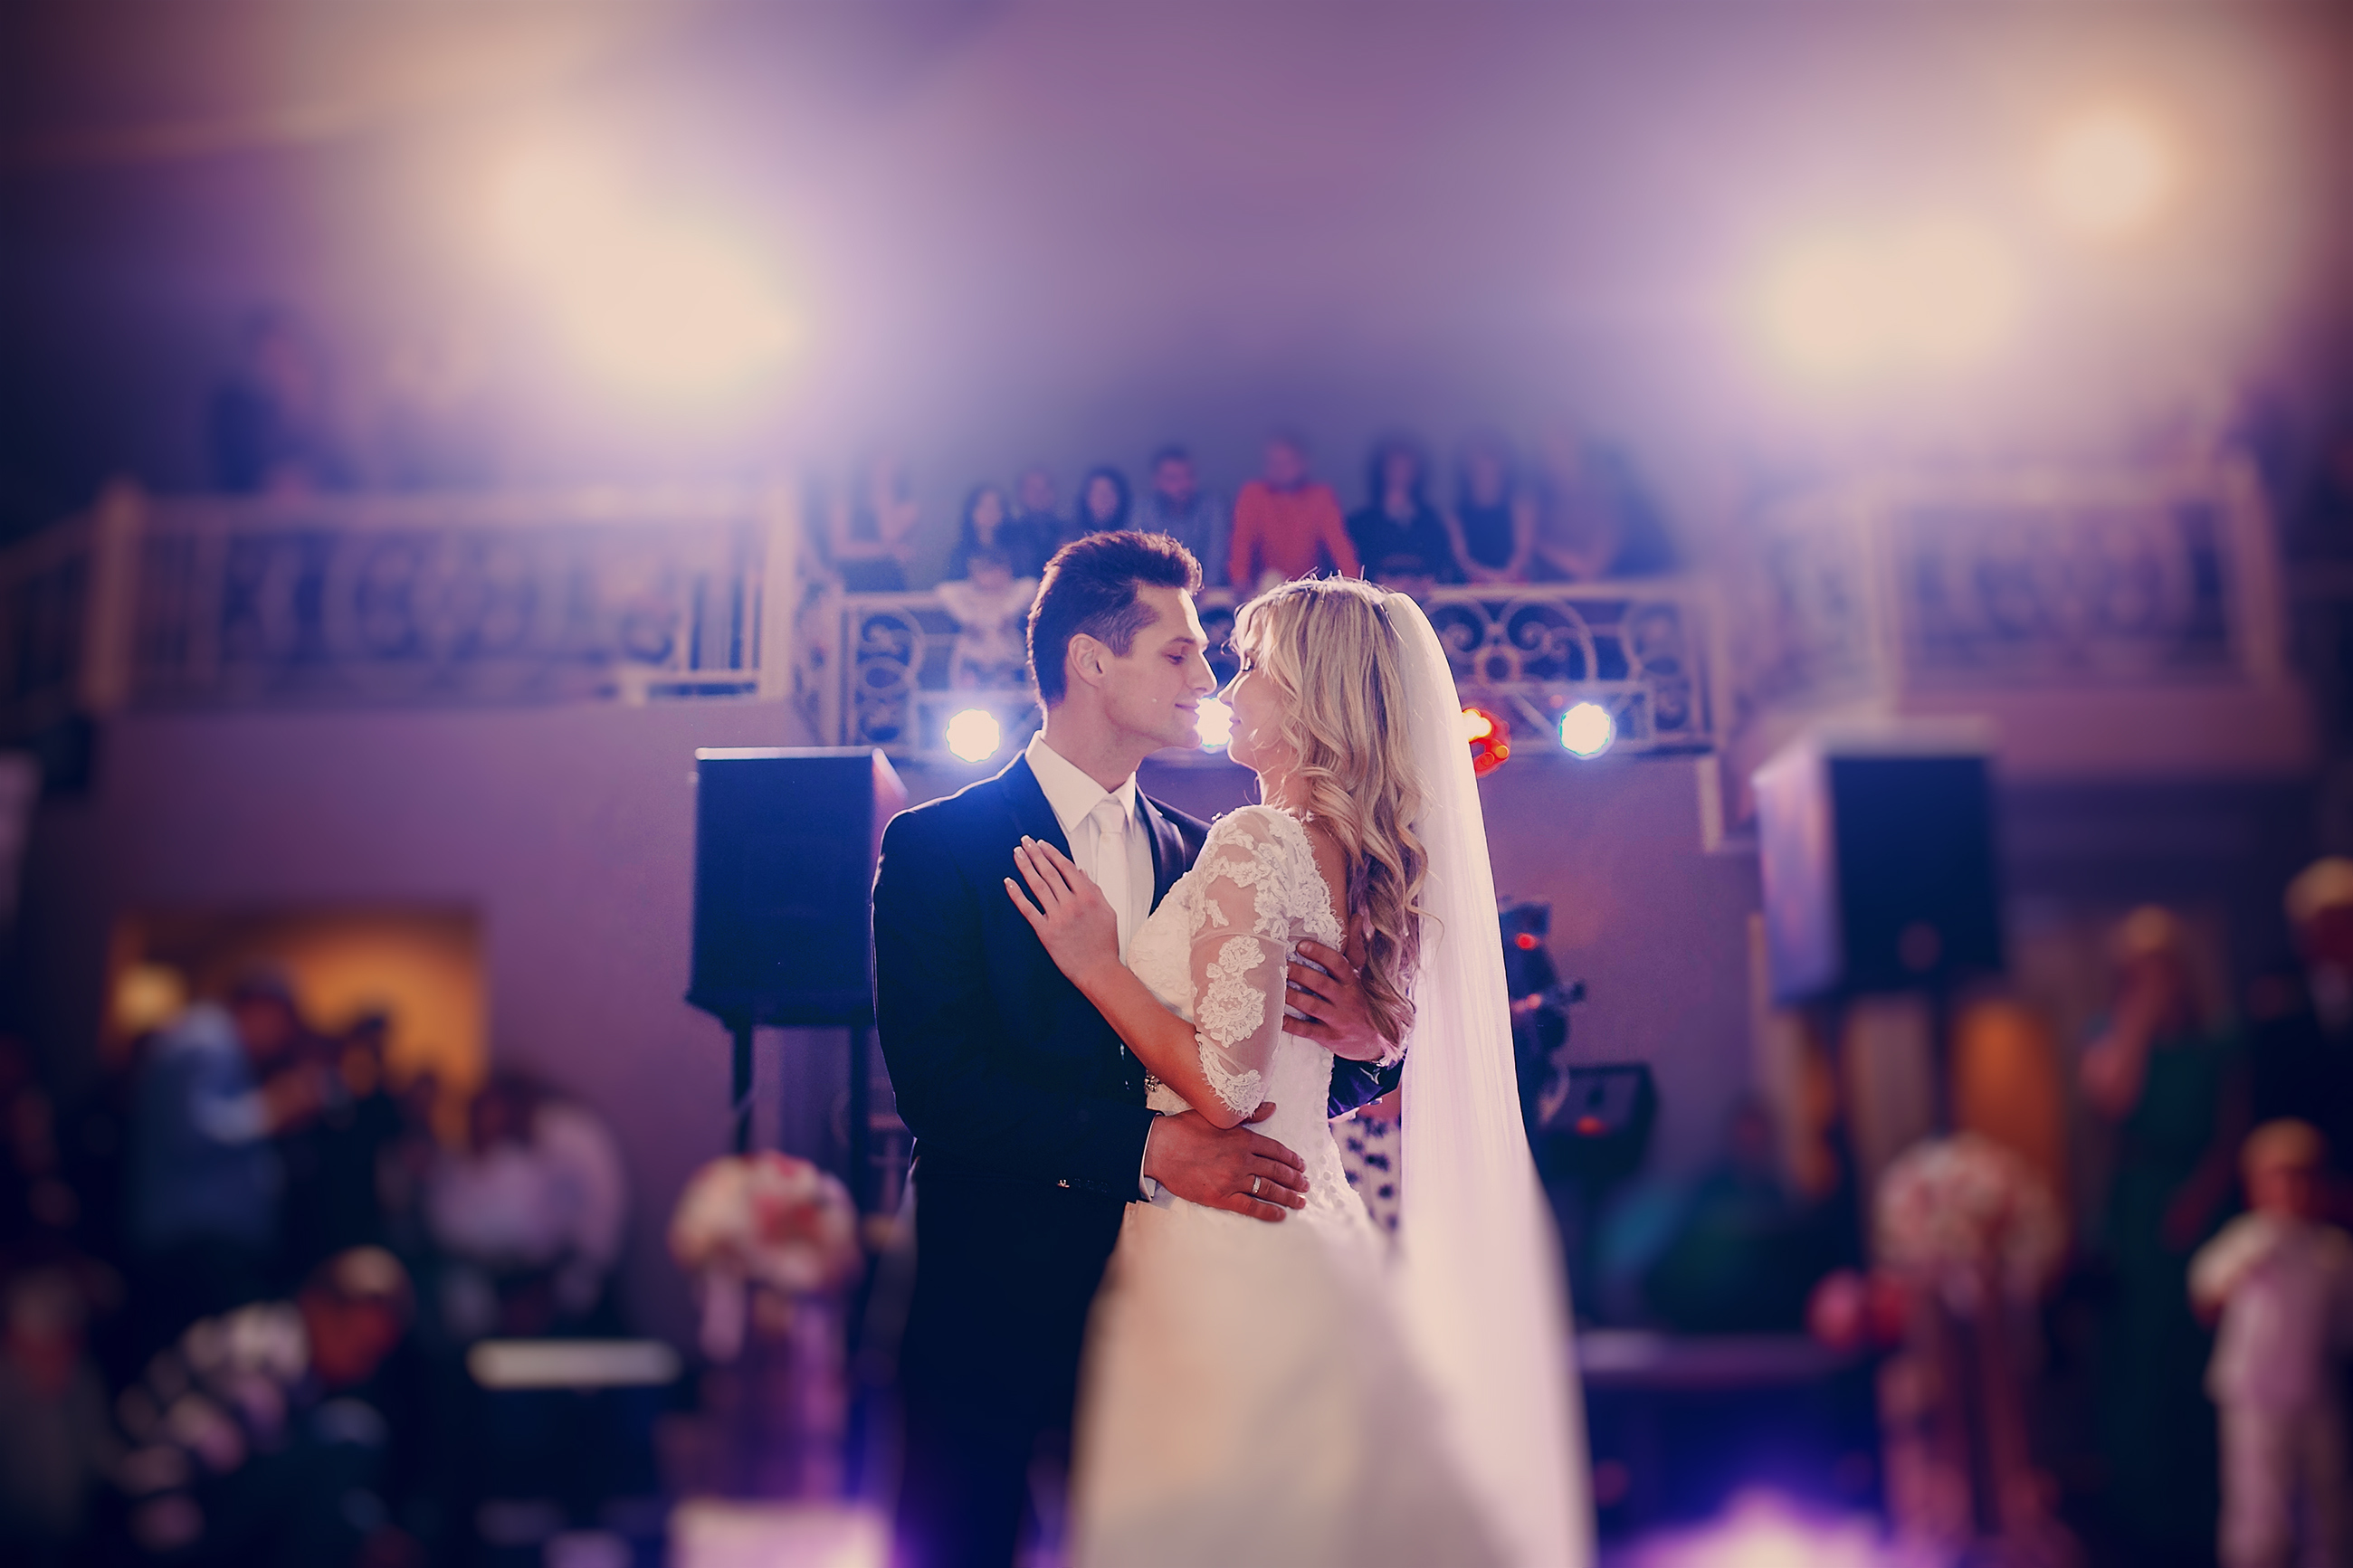 Bride's Sister Captured 'Sneaking Off' Before Couple's First Dance